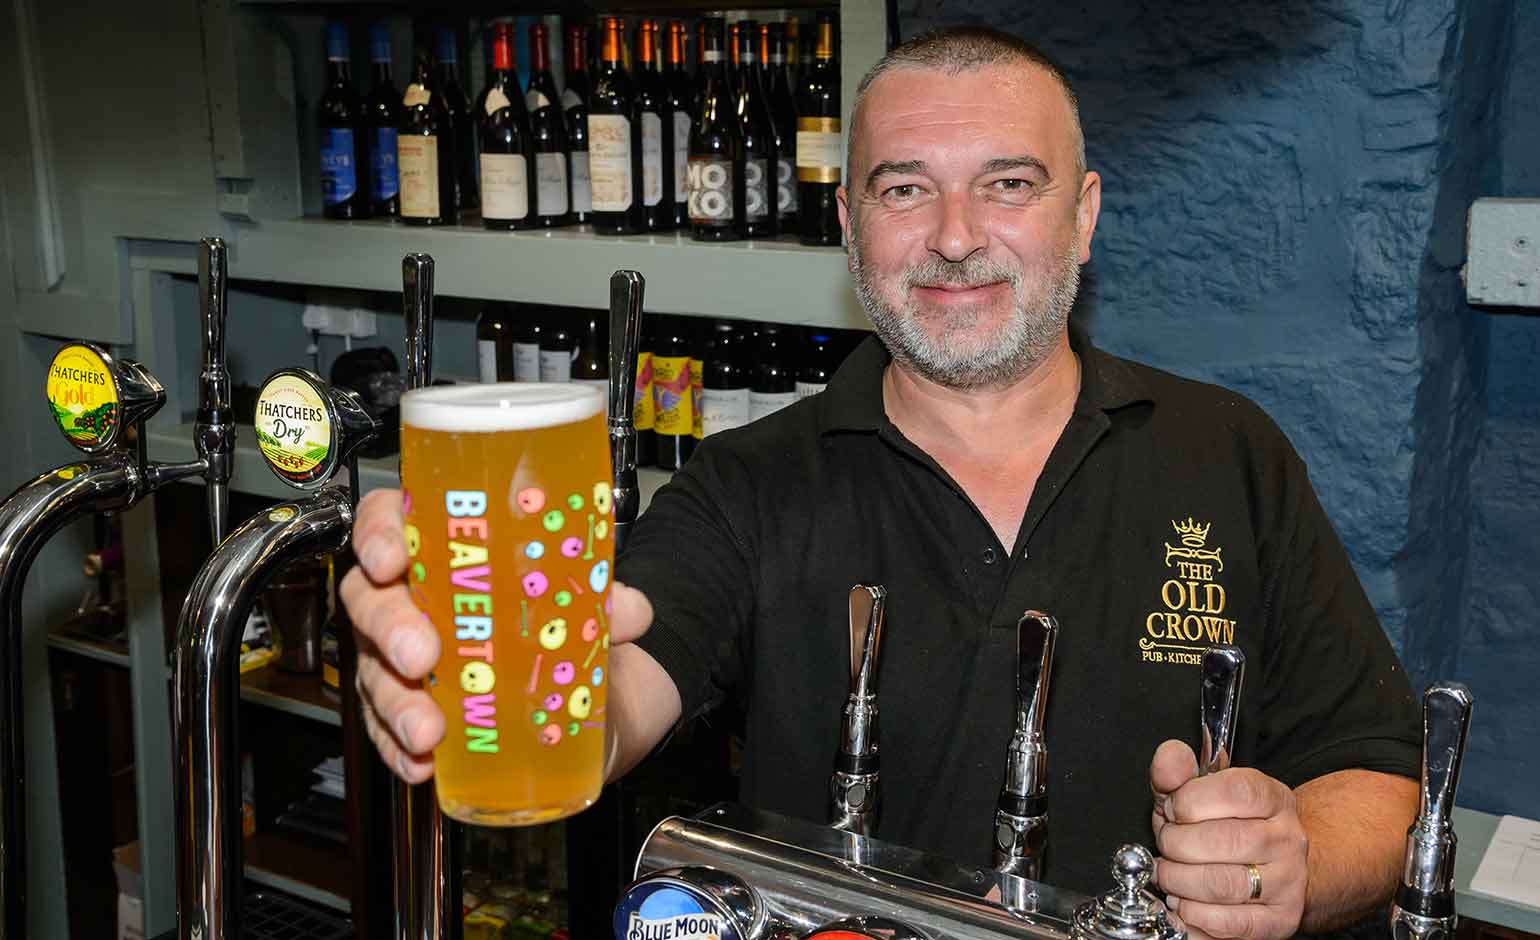 Village pub reopens following £165k makeover creating 10 new jobs